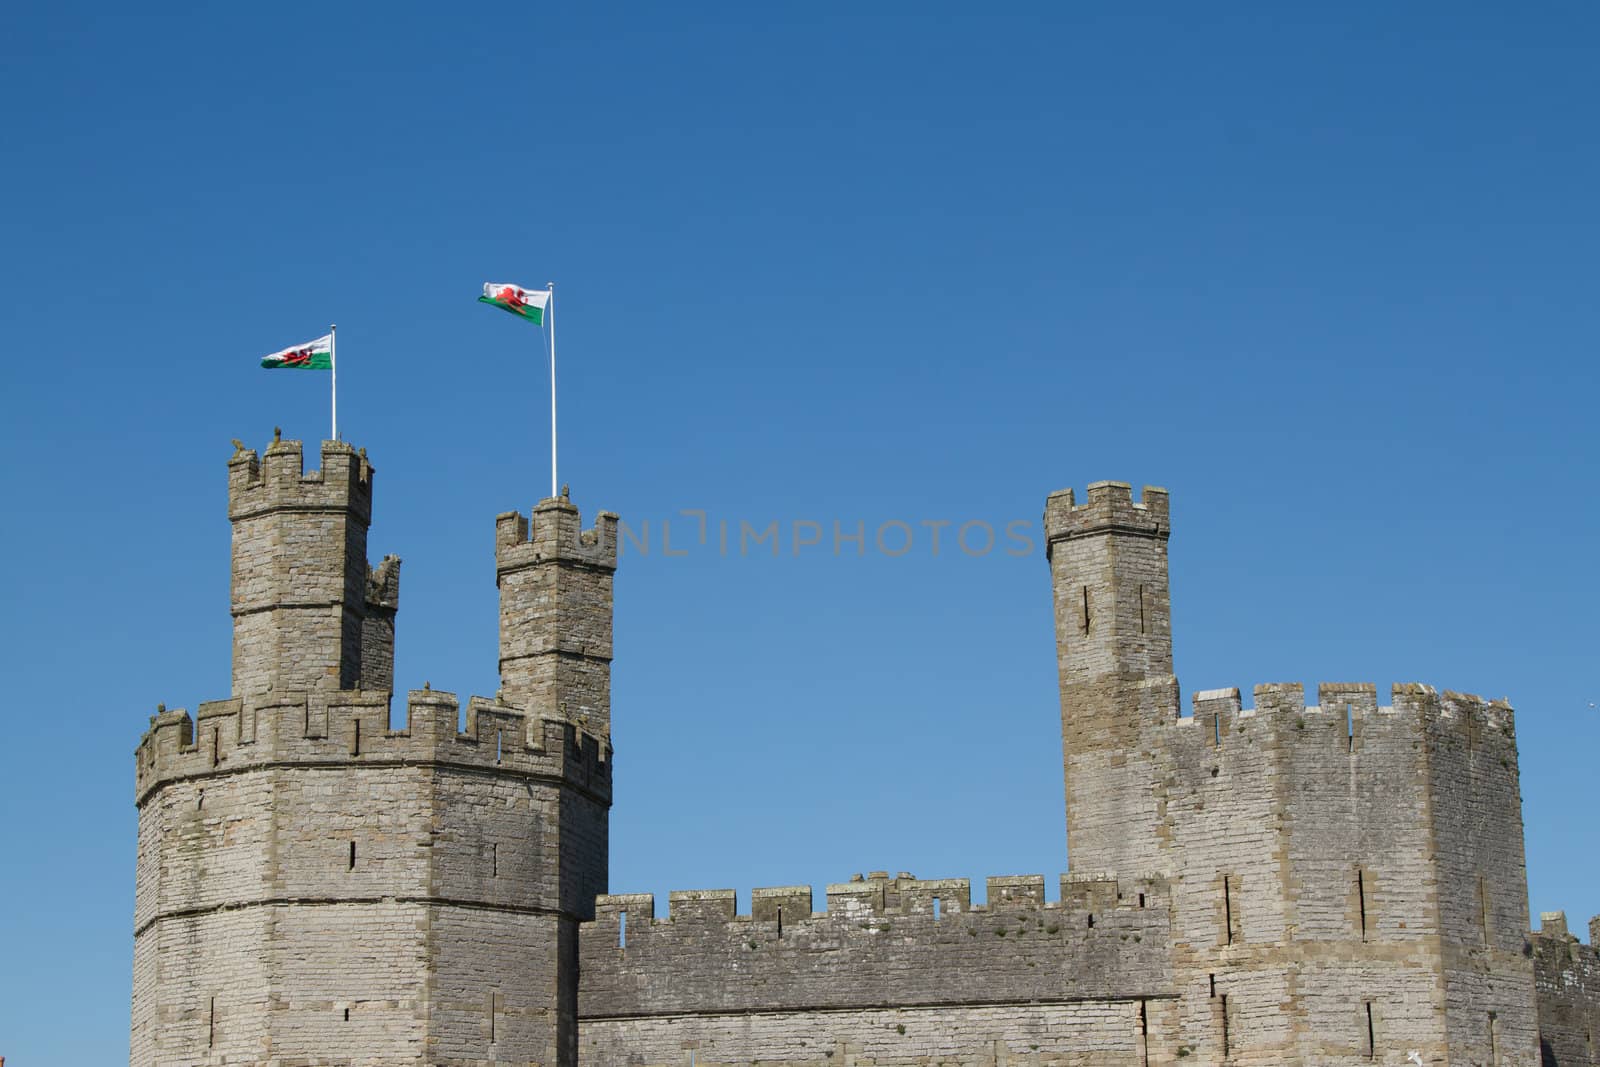 The towers, walls and ramparts of a castle with two Welsh flags flying against a clear blue sky.